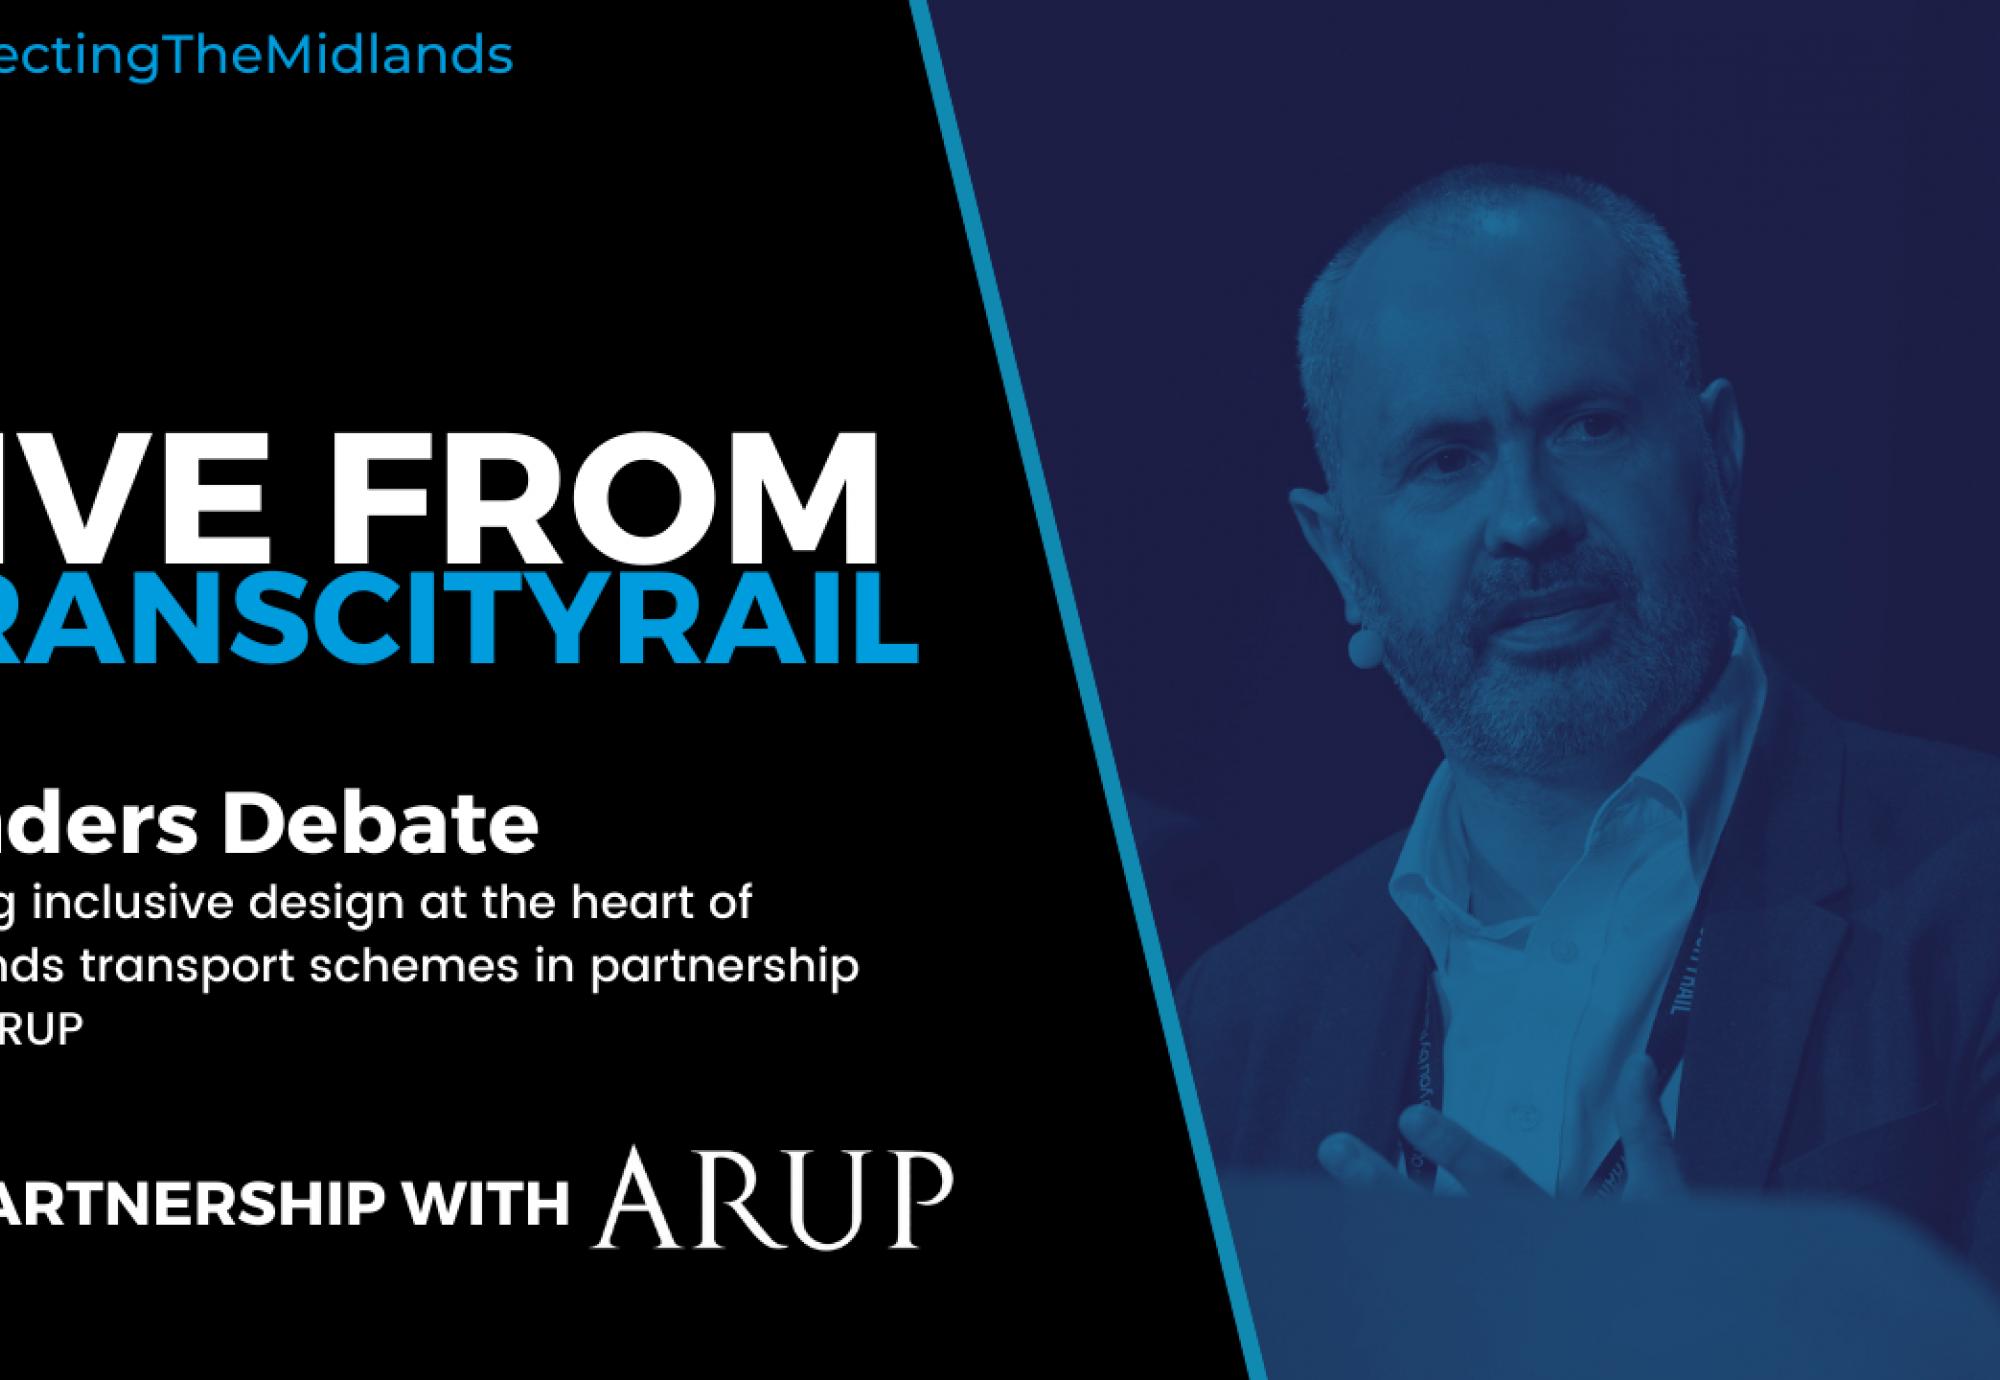 Leaders Debate - Putting inclusive design at the heart of Midlands transport schemes in partnership with ARUP